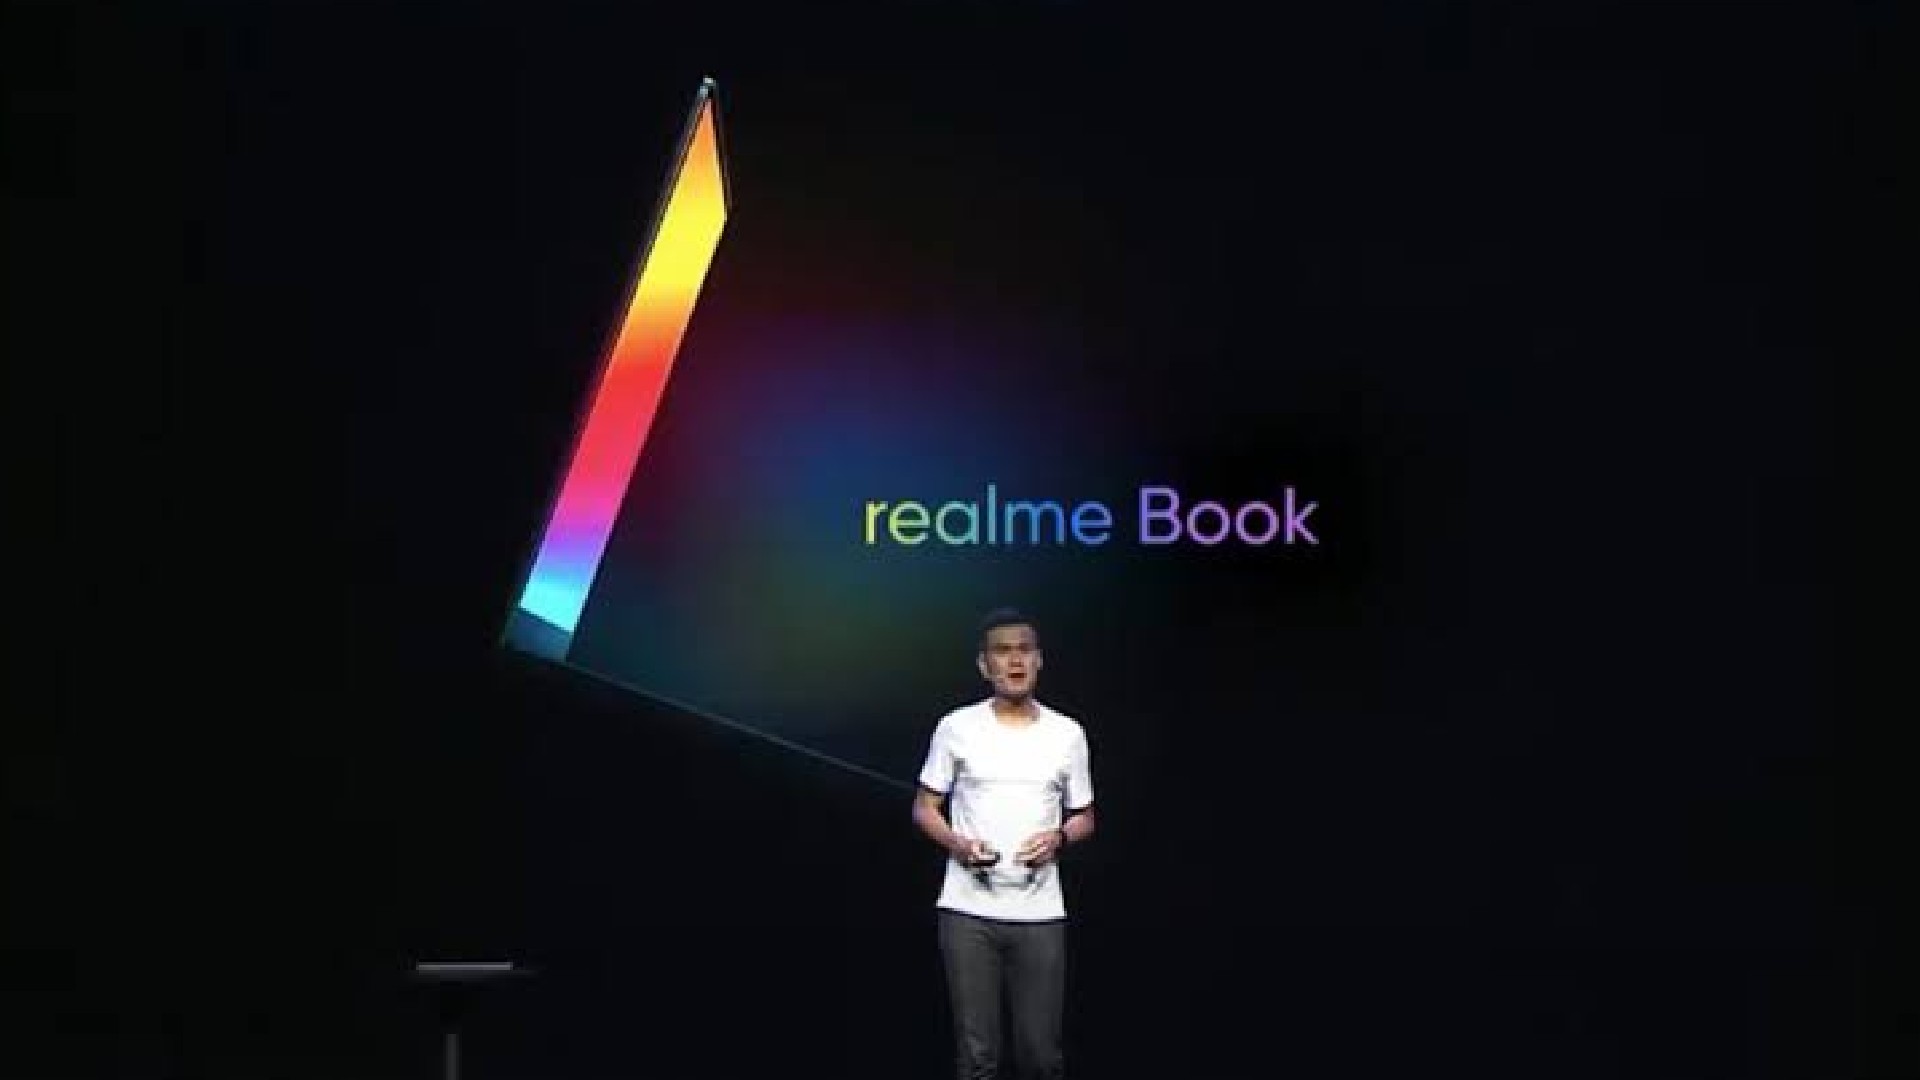 Realme Book To Run Windows 11, Have Thinnest Body: When Will It Launch?